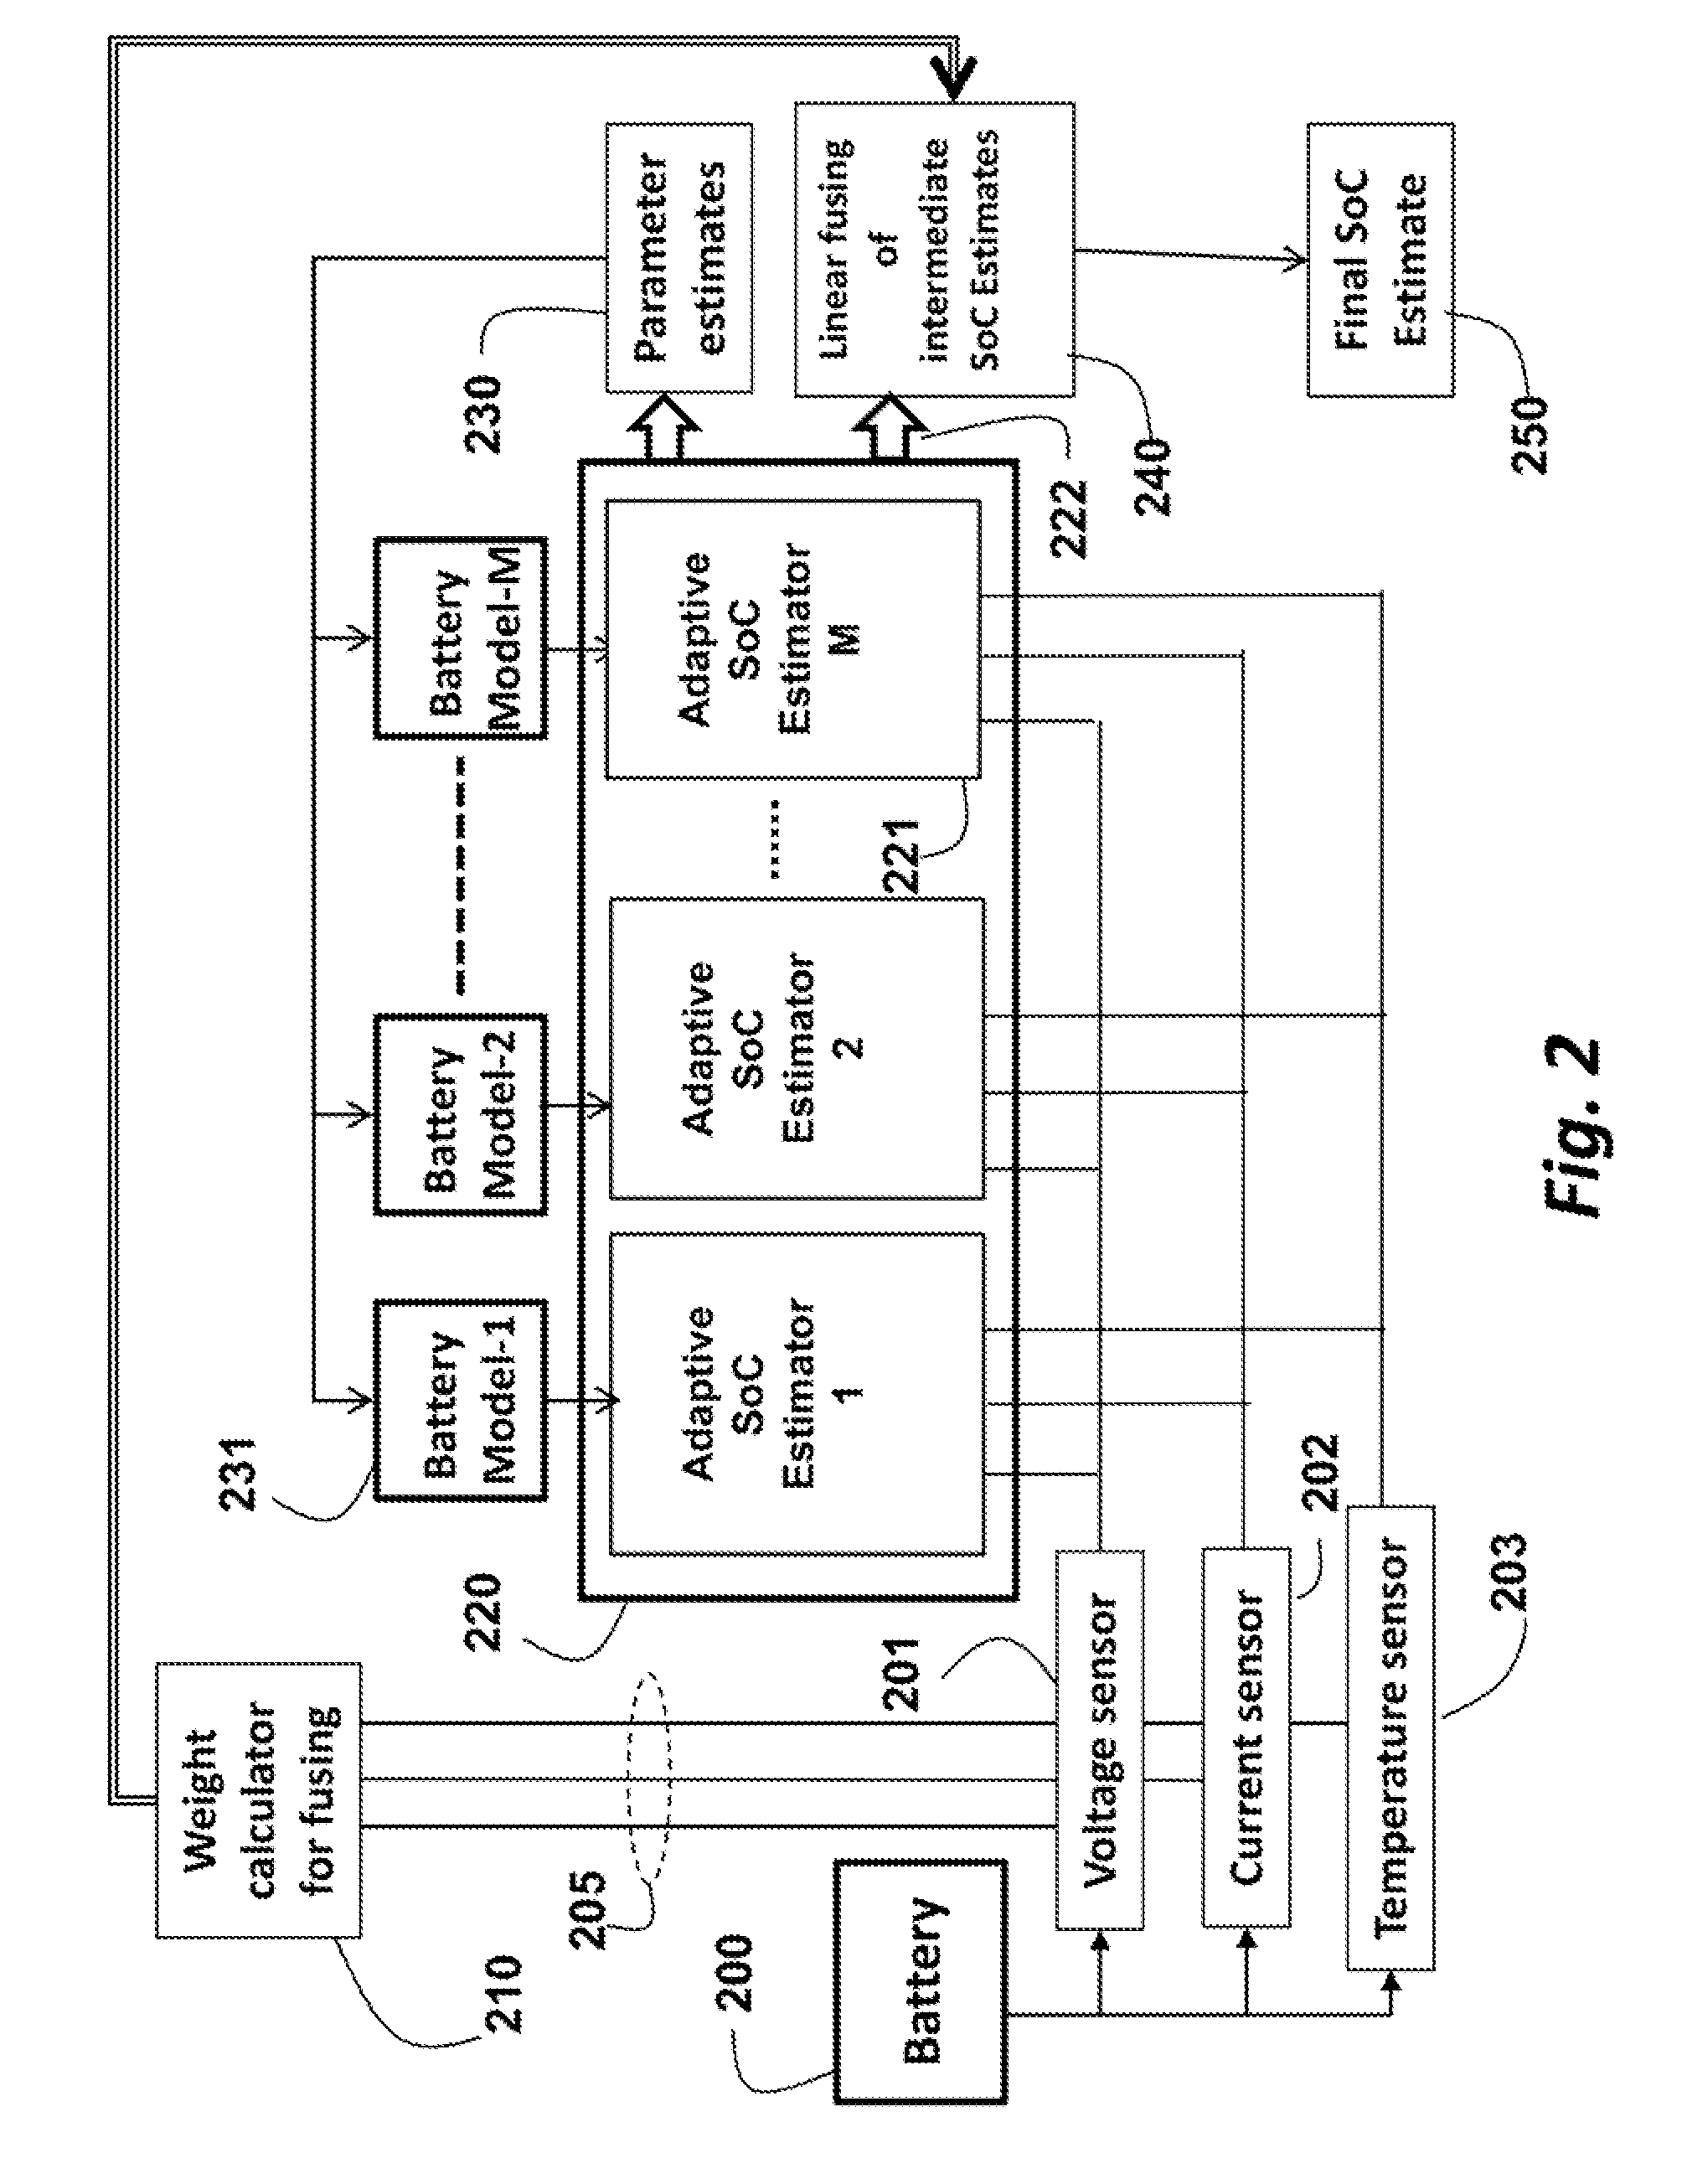 Method for estimating a state of charge of batteries